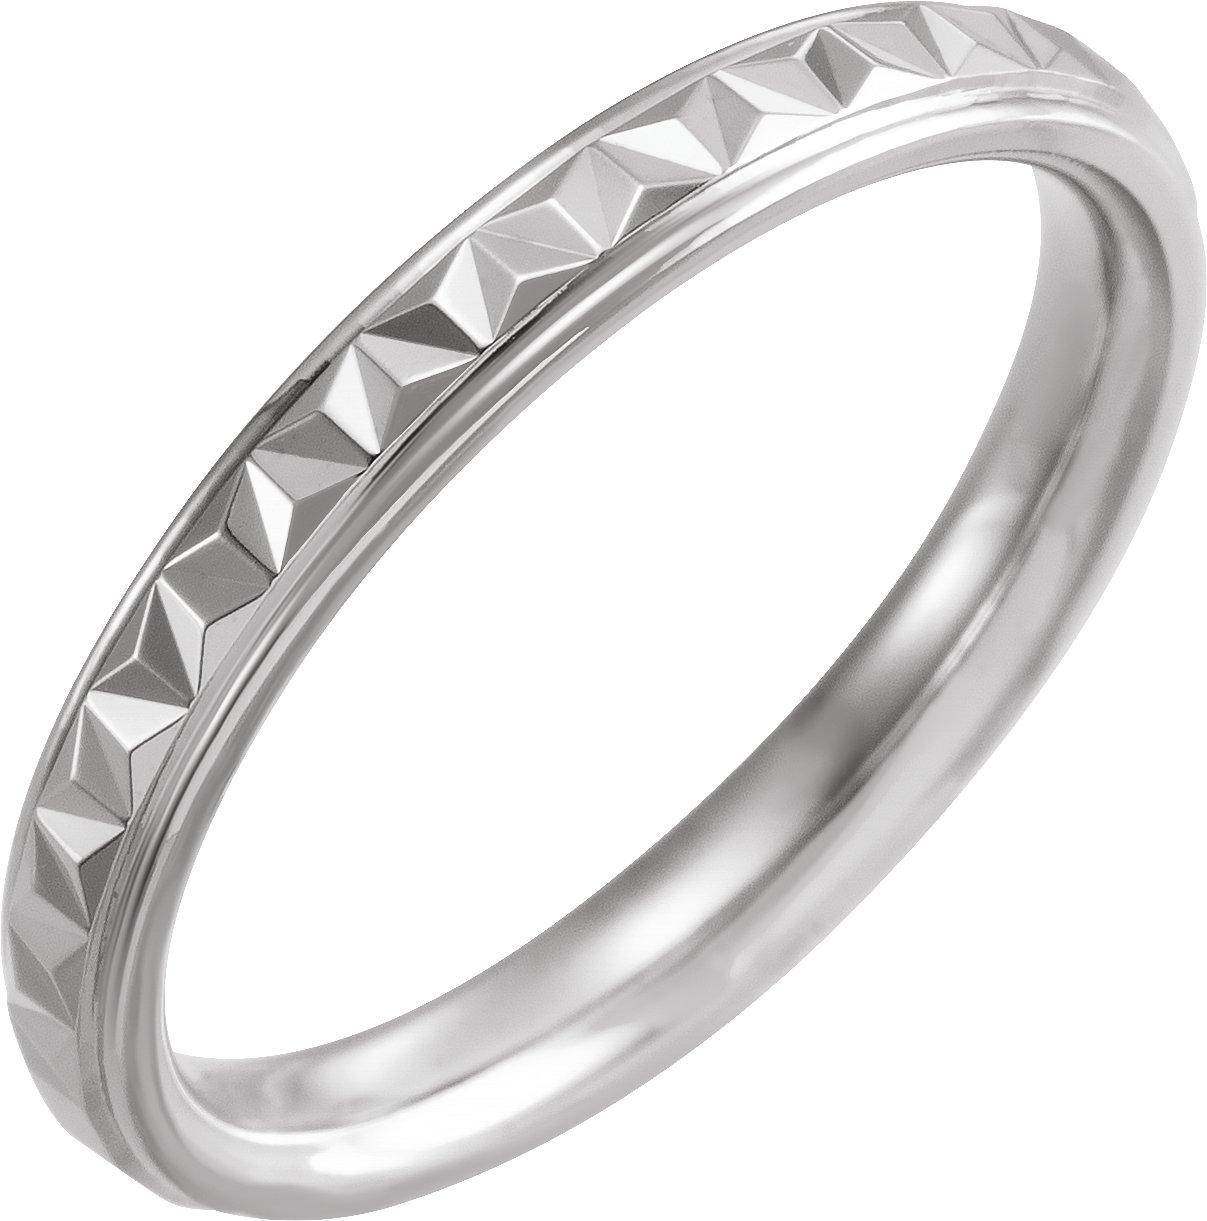 Continuum Sterling Silver 3 mm Geometric Band with Polished Finish Size 7.5